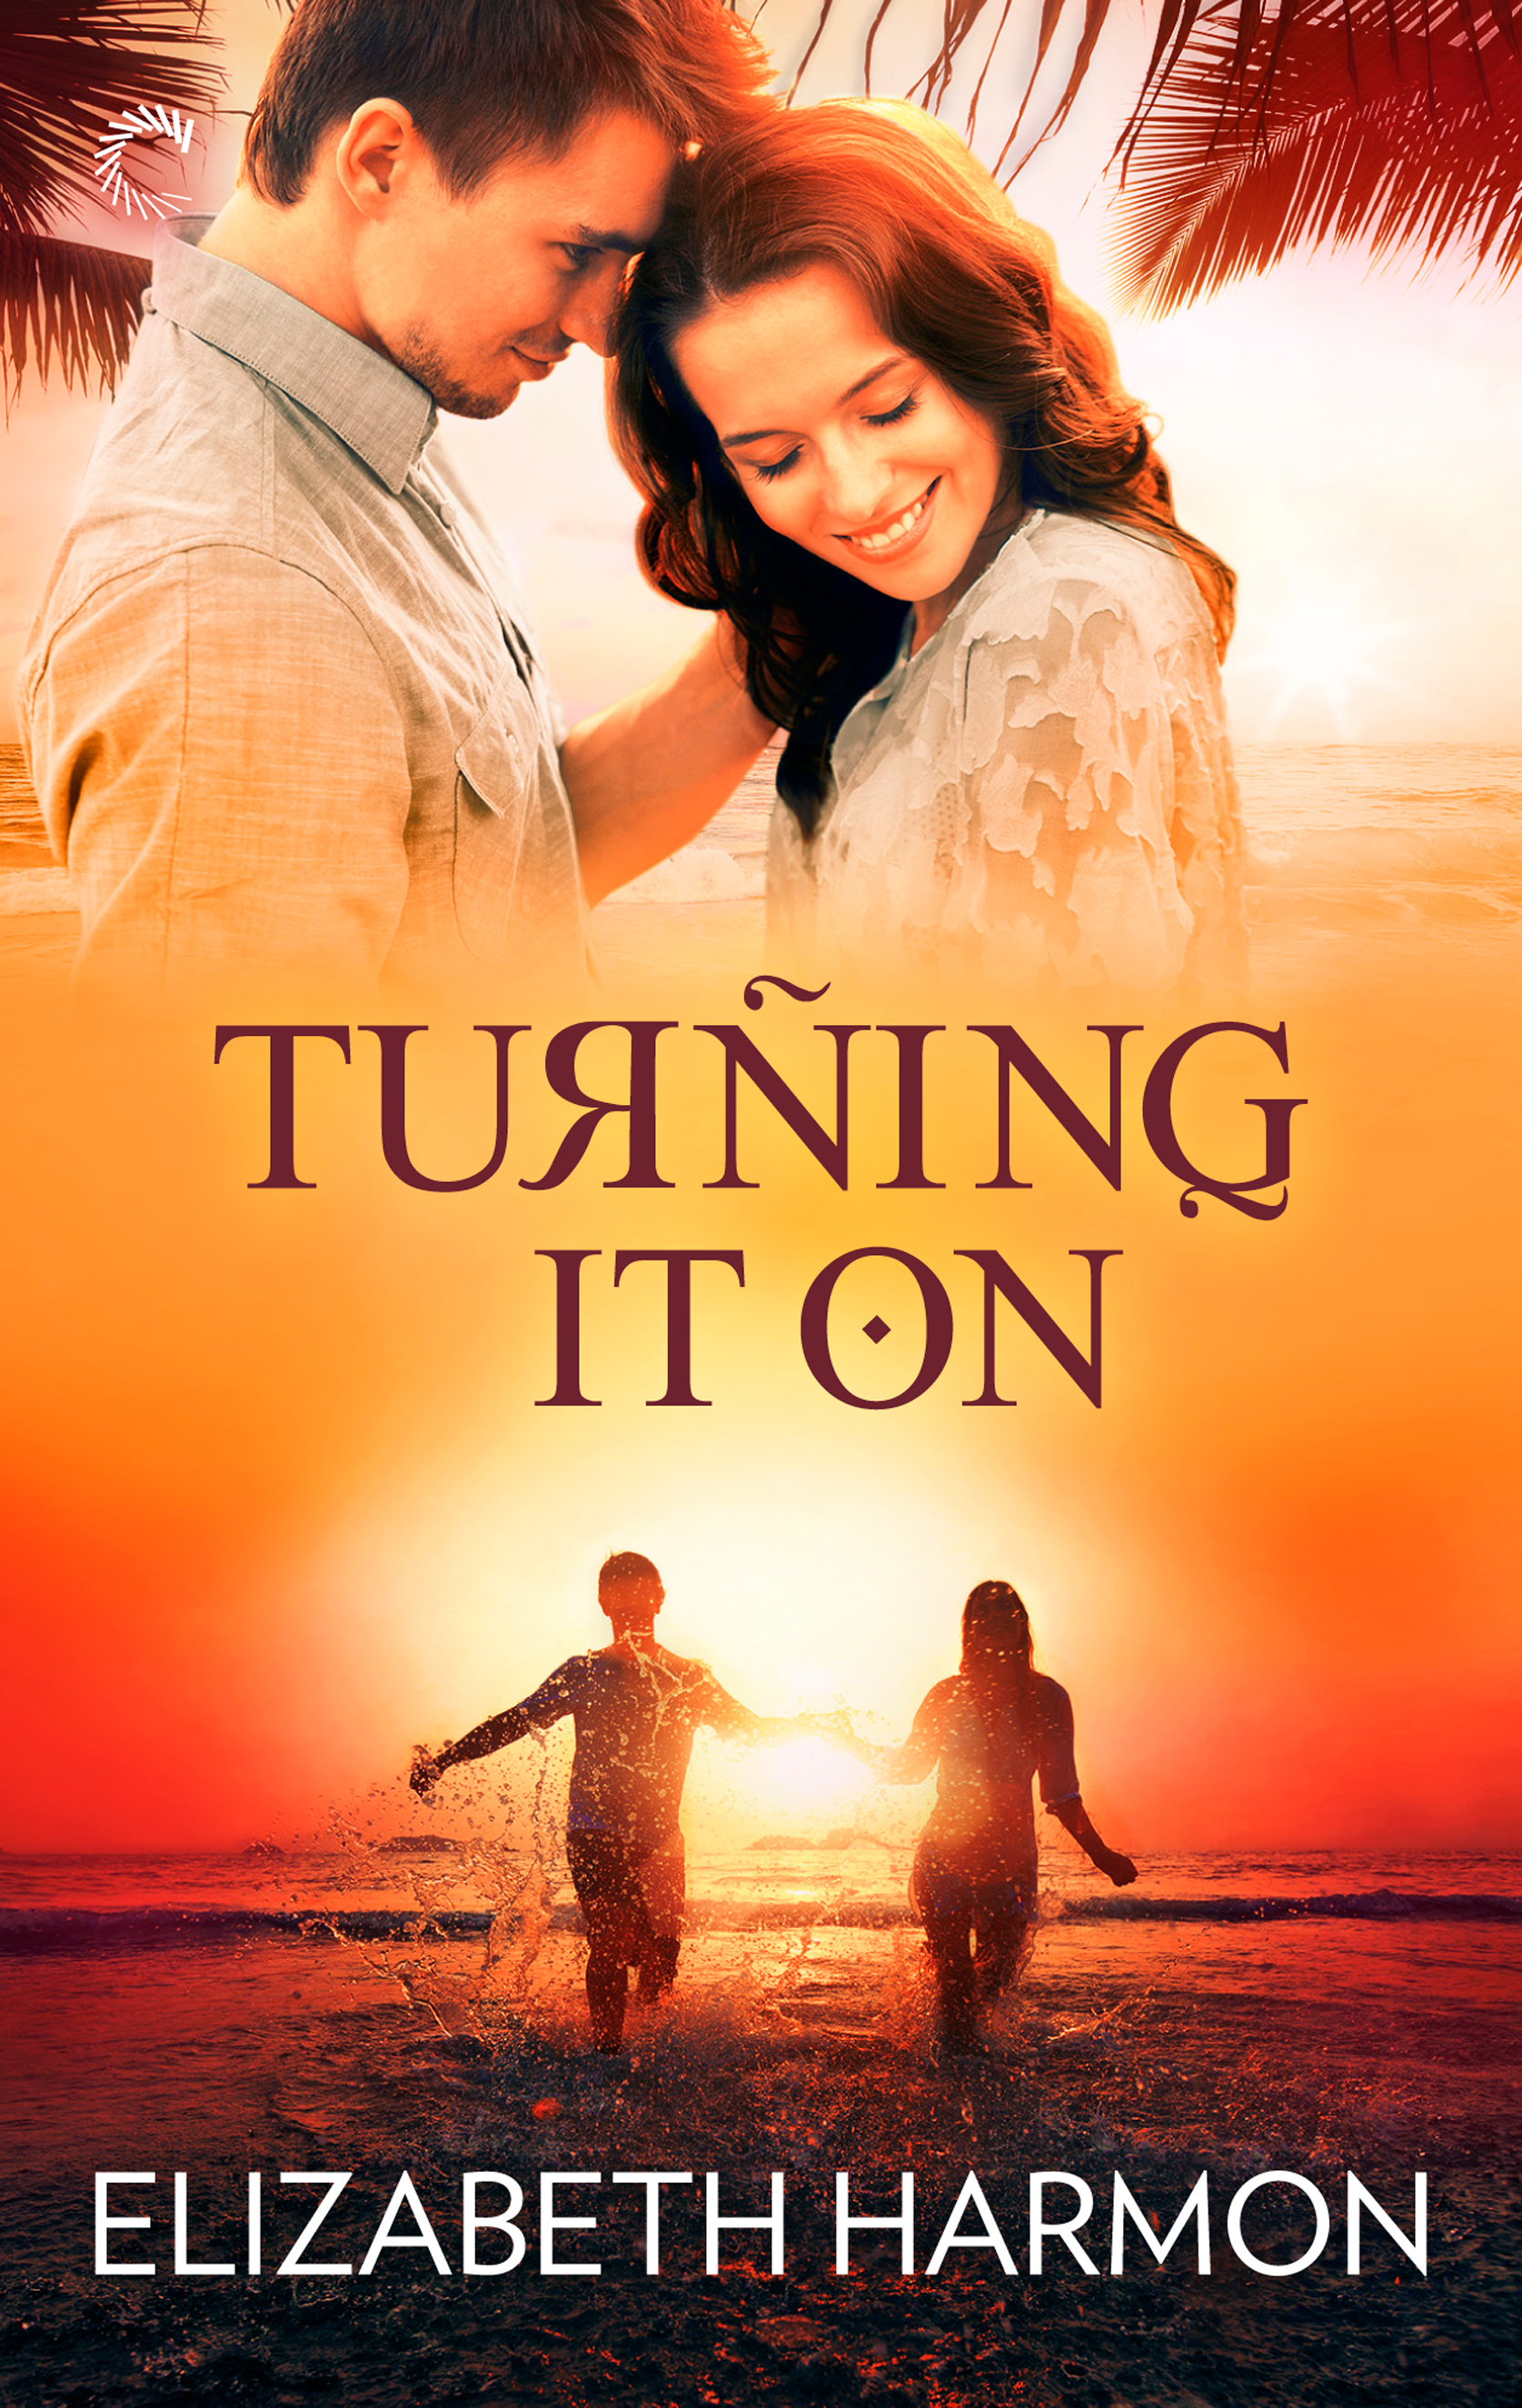 Book Tour, Excerpt, Review & Giveaway: Turning It On by Elizabeth Harmon – Books ...1675 x 2650